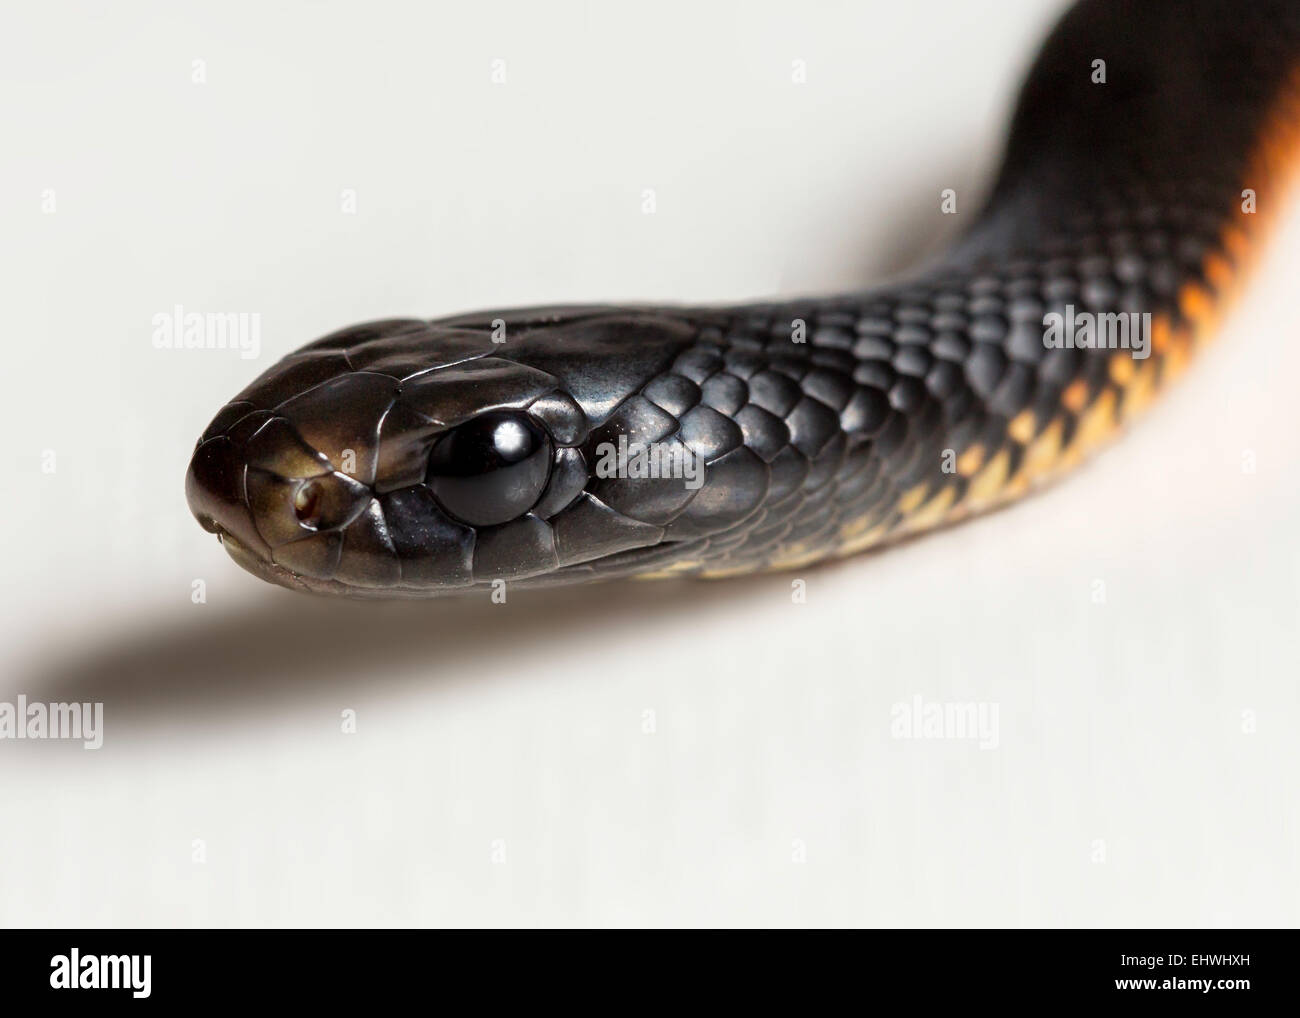 A red bellied black snake juvenile (Pseudechis porphyriacus) up close on a white background Stock Photo